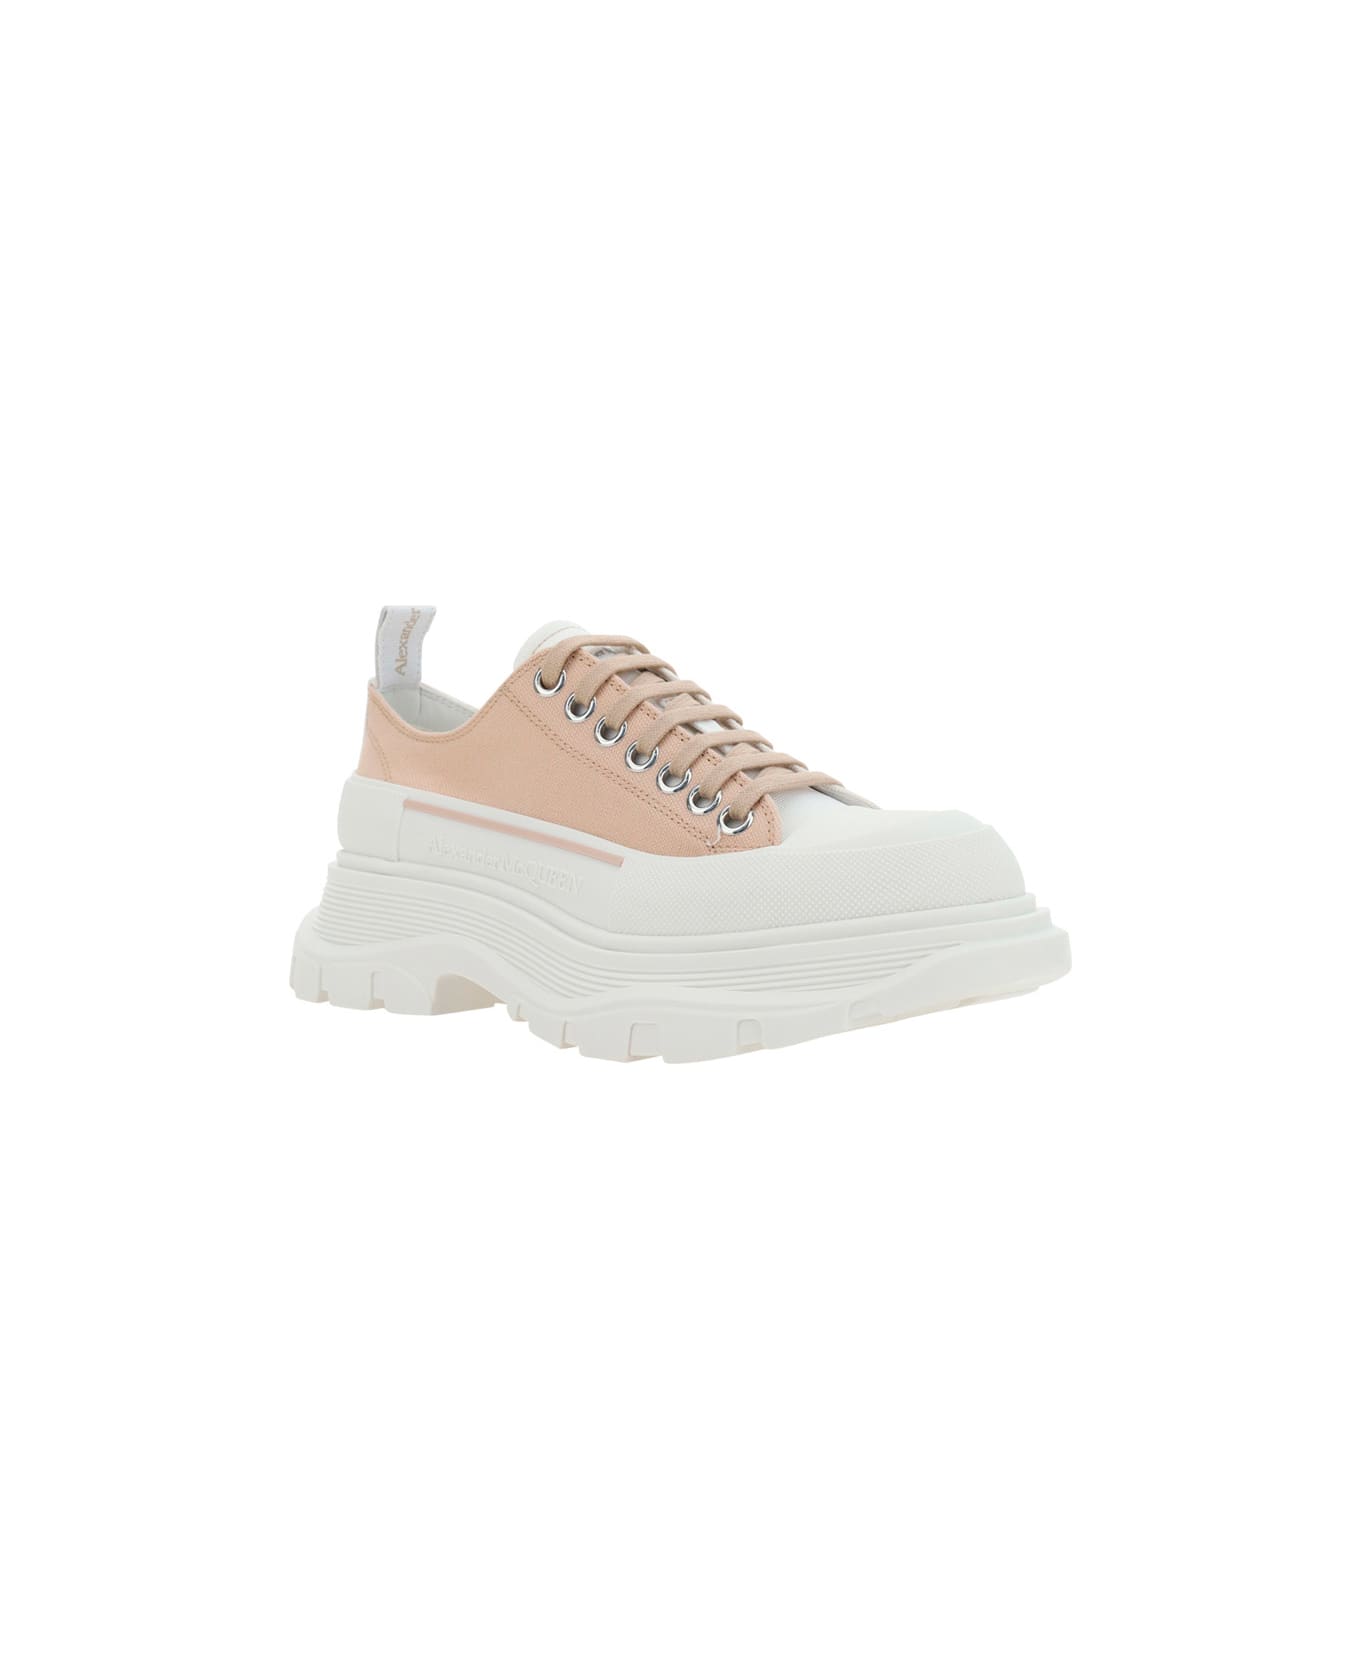 Alexander McQueen Tread Slick Sneakers - Bl Bo Wh Of Wh Bl